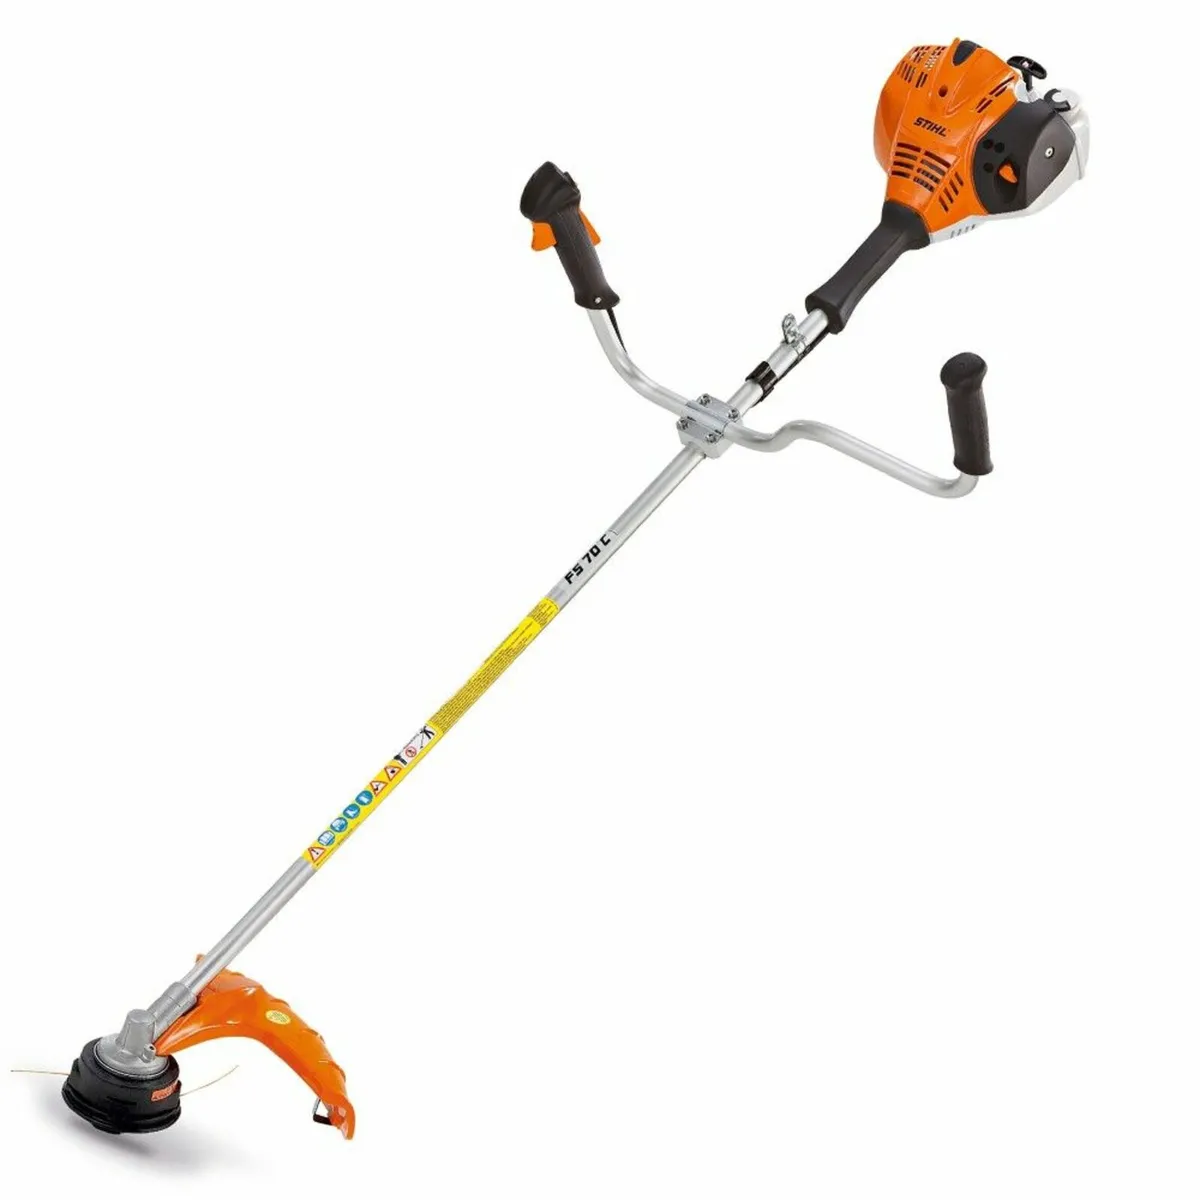 Used Strimmers & Hedgetrimmers - STIHL, Honda, etc - Image 1